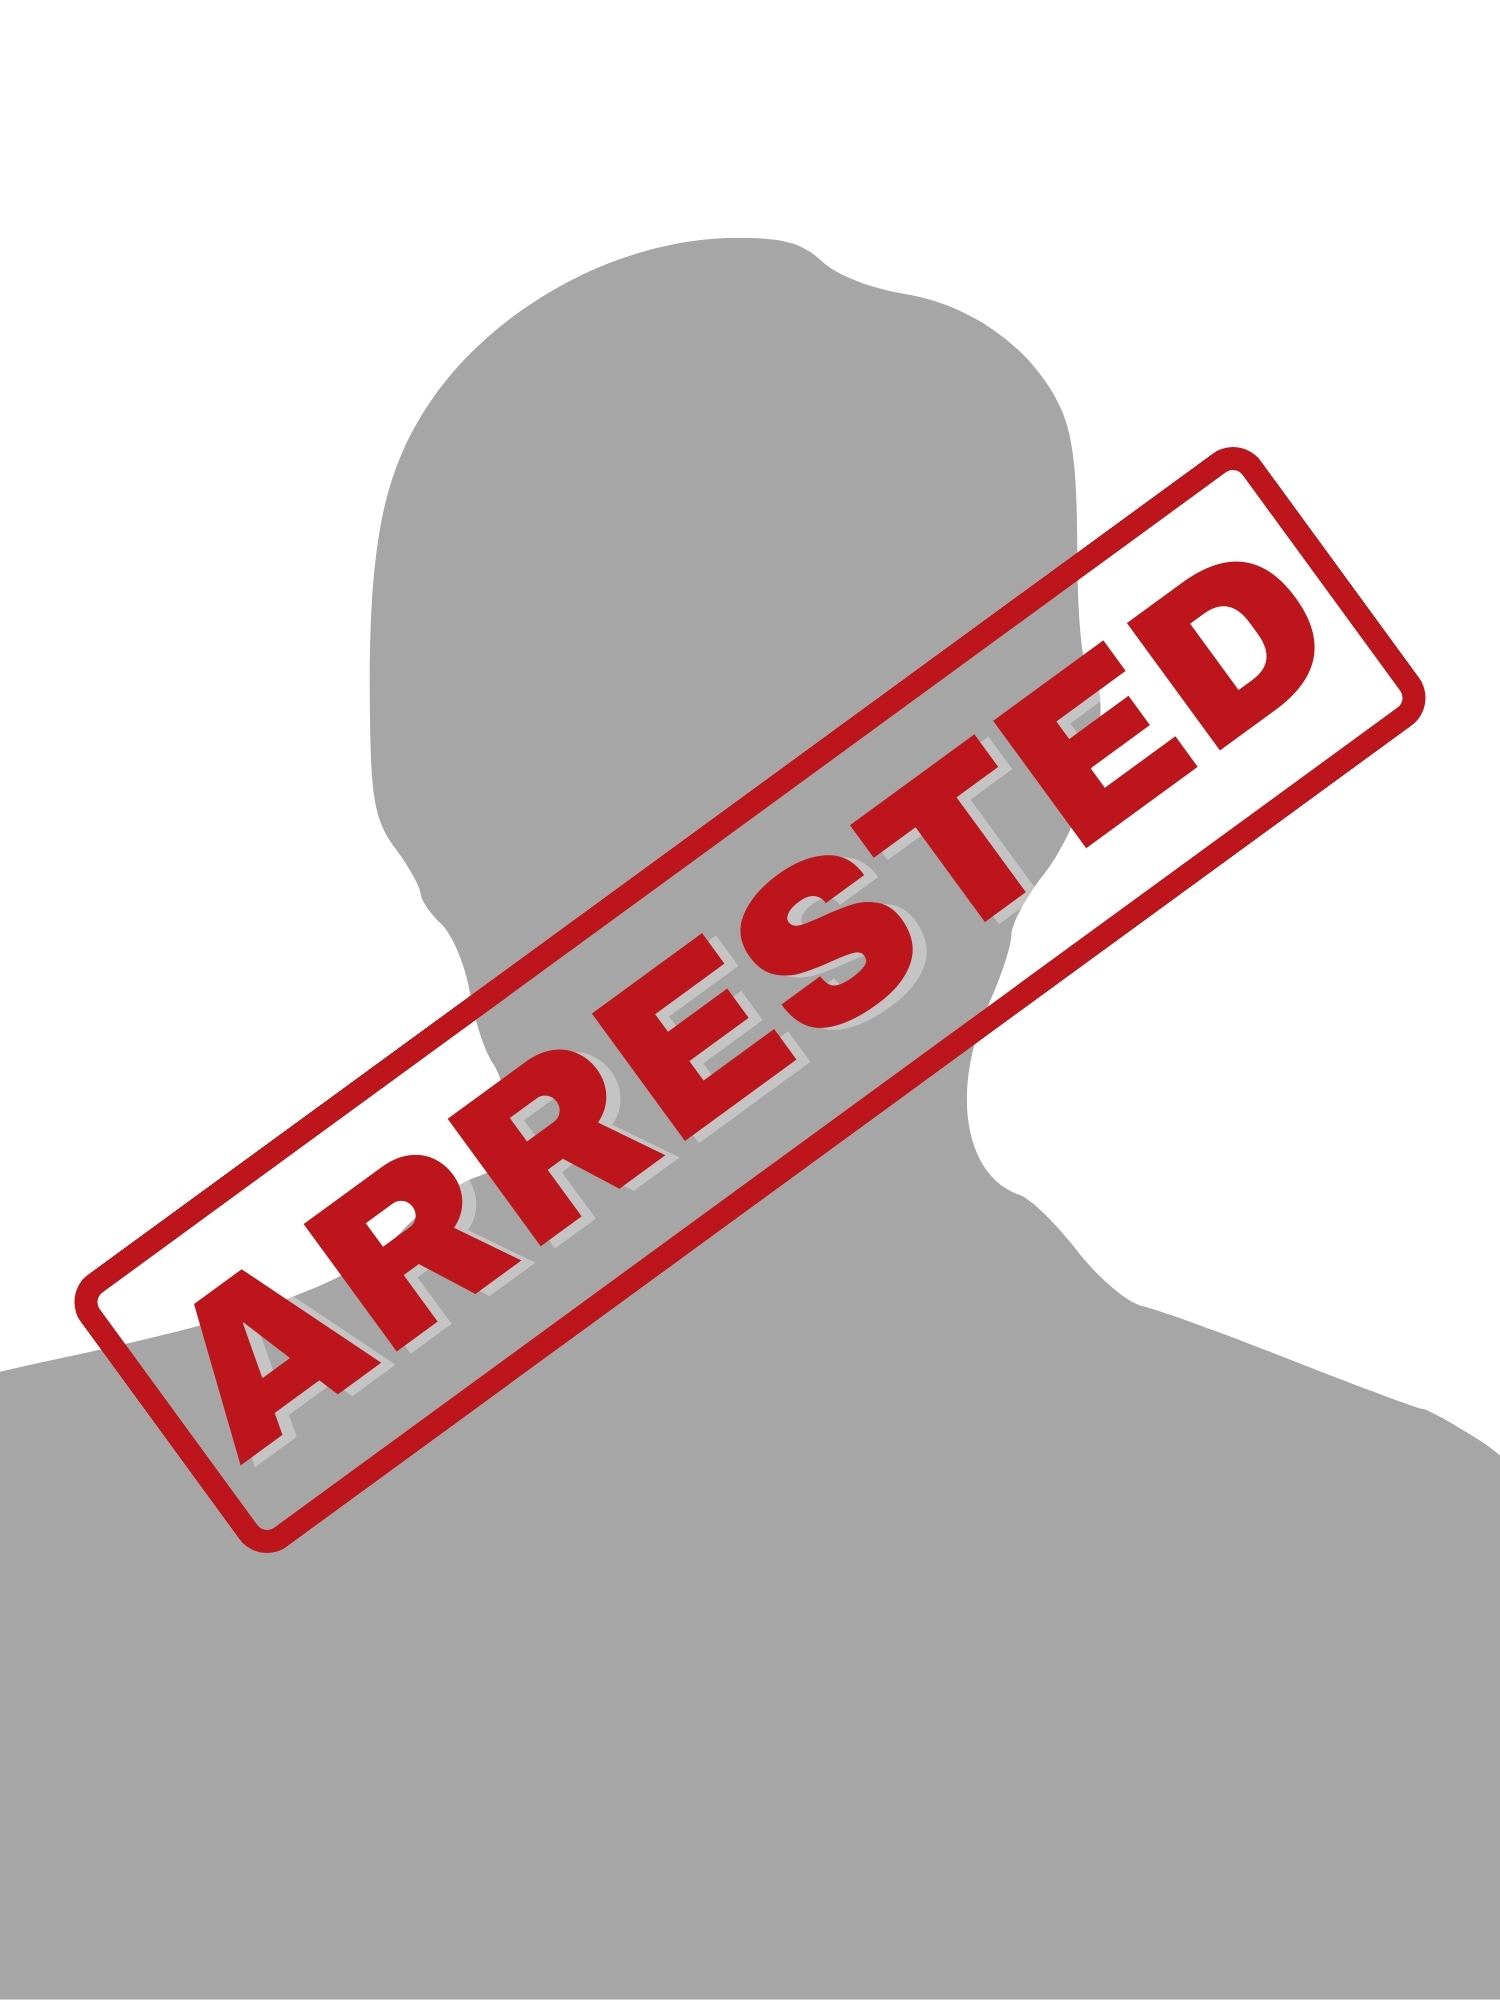 Image of UPDATE: CompStat Subject Arrested